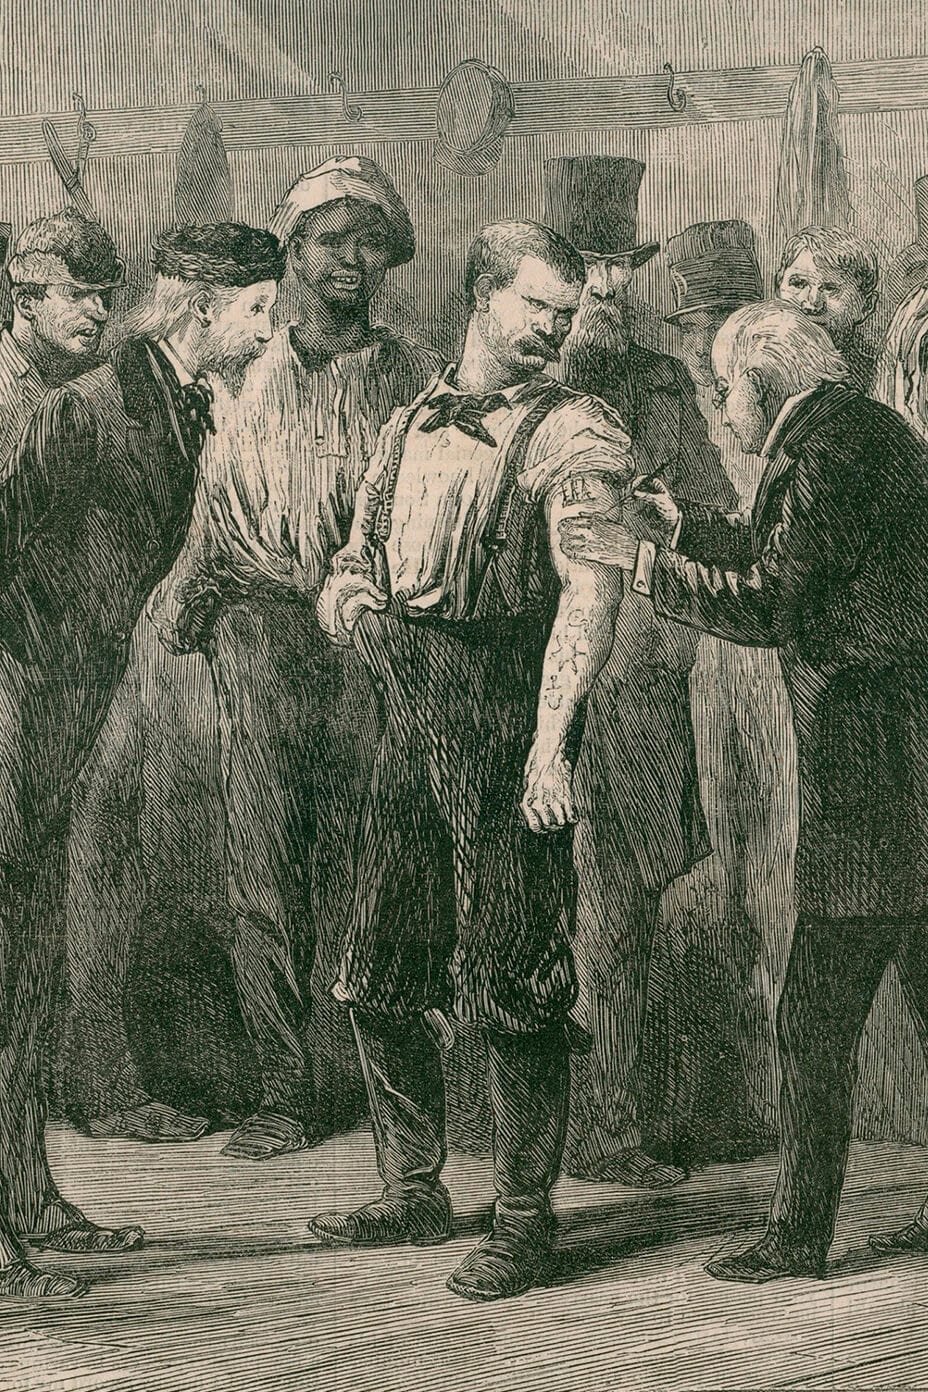 Many people in New York City being vaccinated from smallpox in 1872